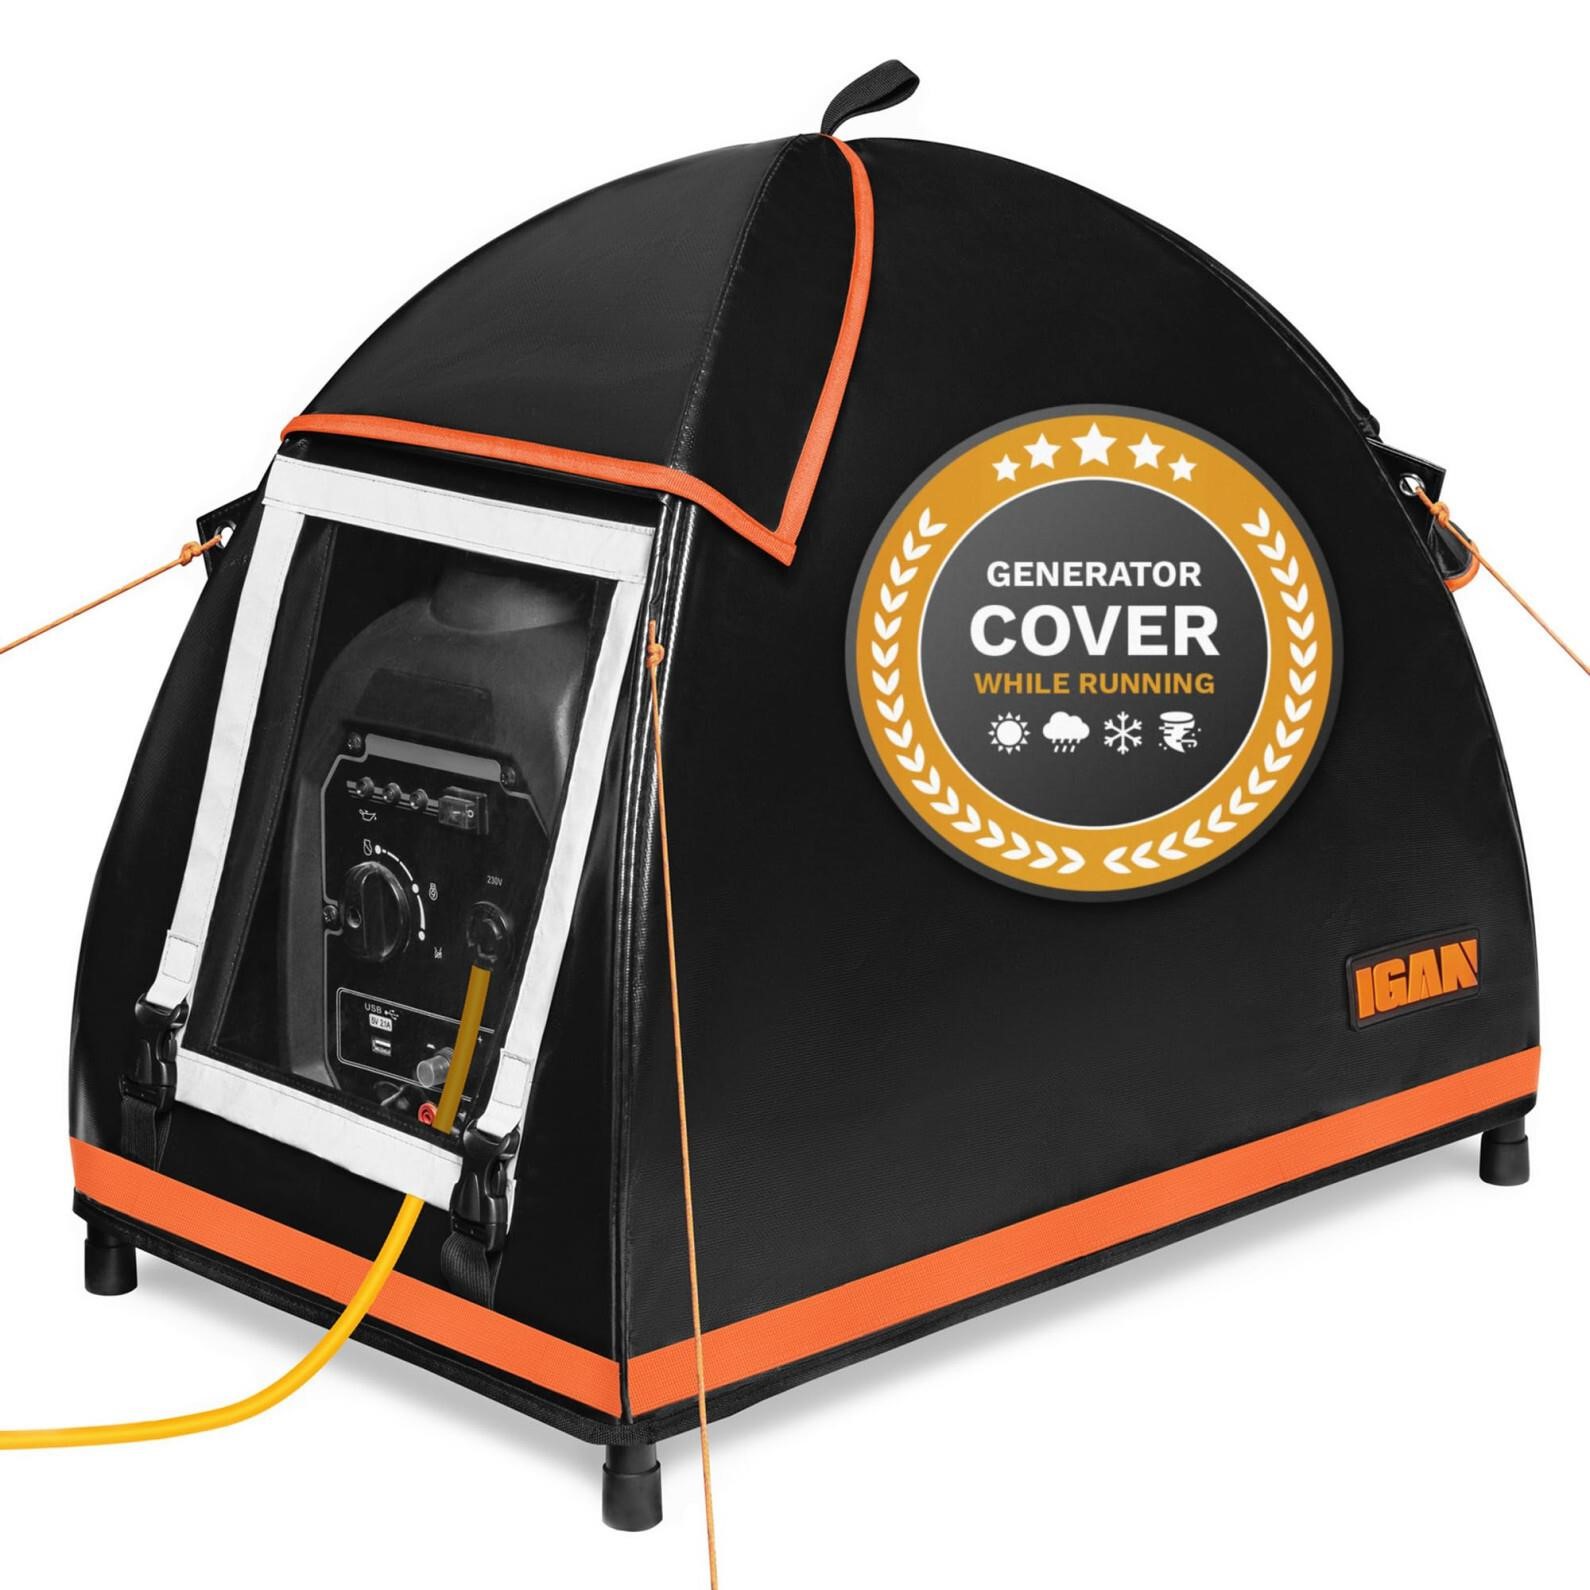 IGAN Small Inverter Generator Tent Cover While Ru